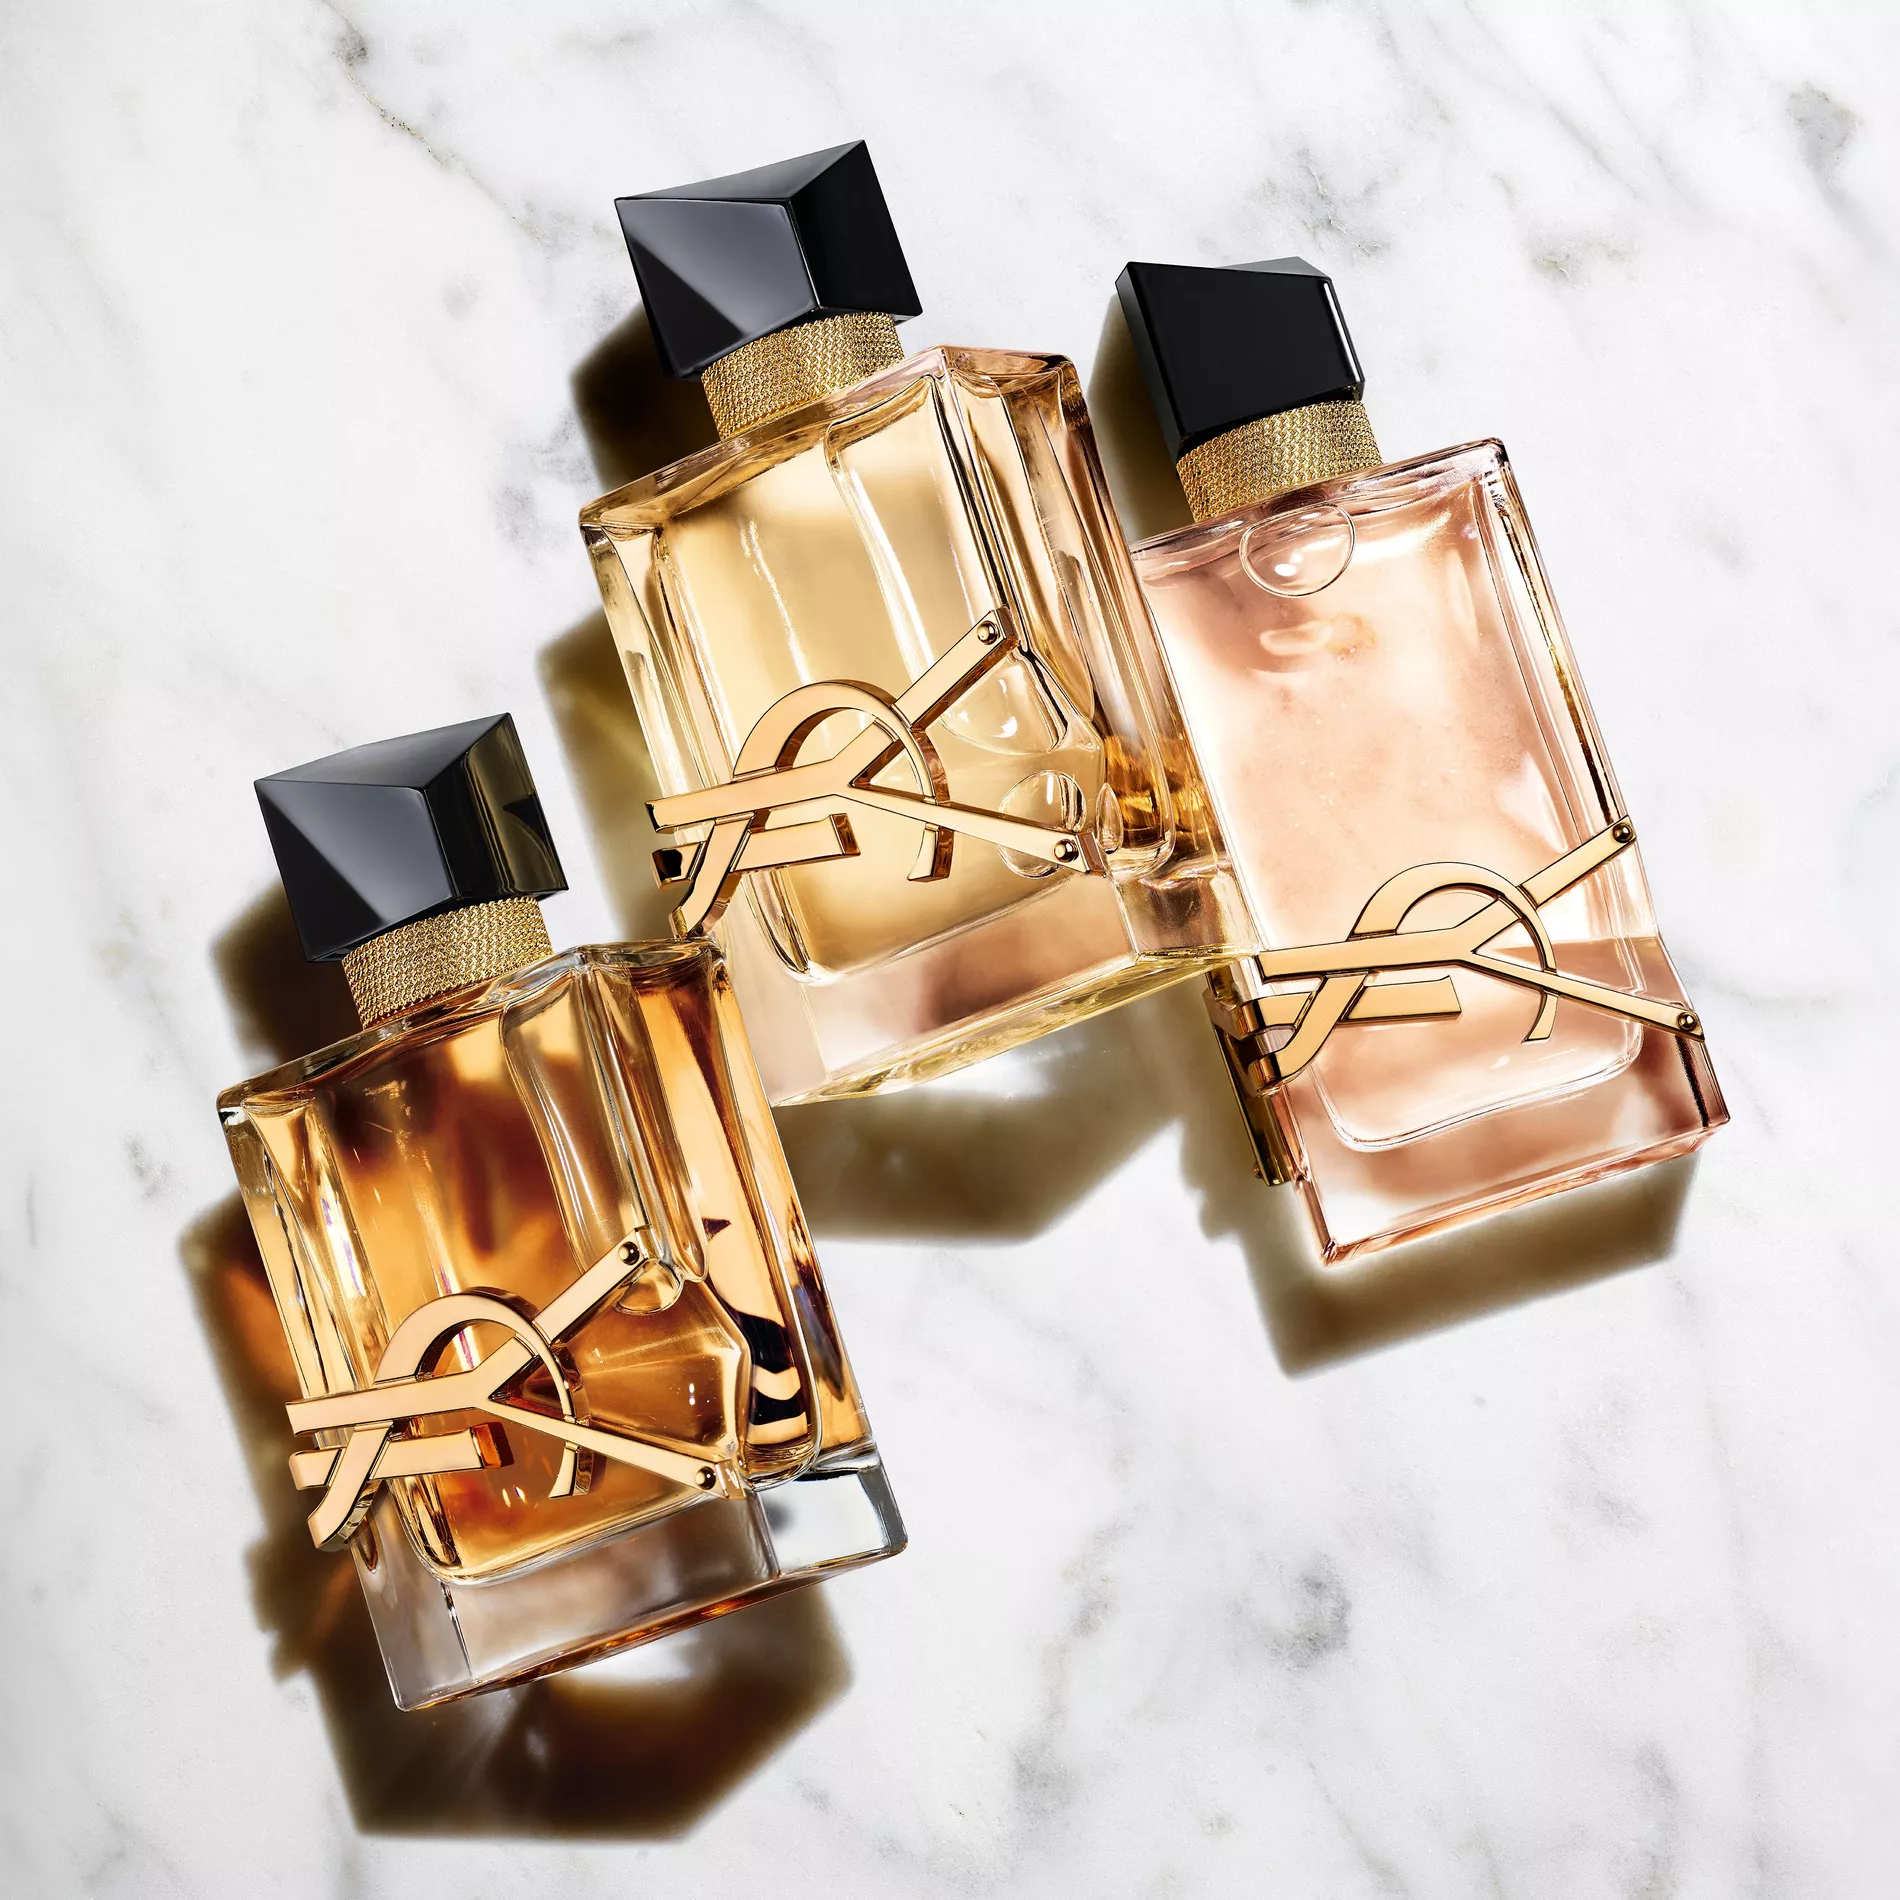 Did My DESIGNER FRAGRANCE COLLECTION Need The *NEW* YSL LIBRE LE